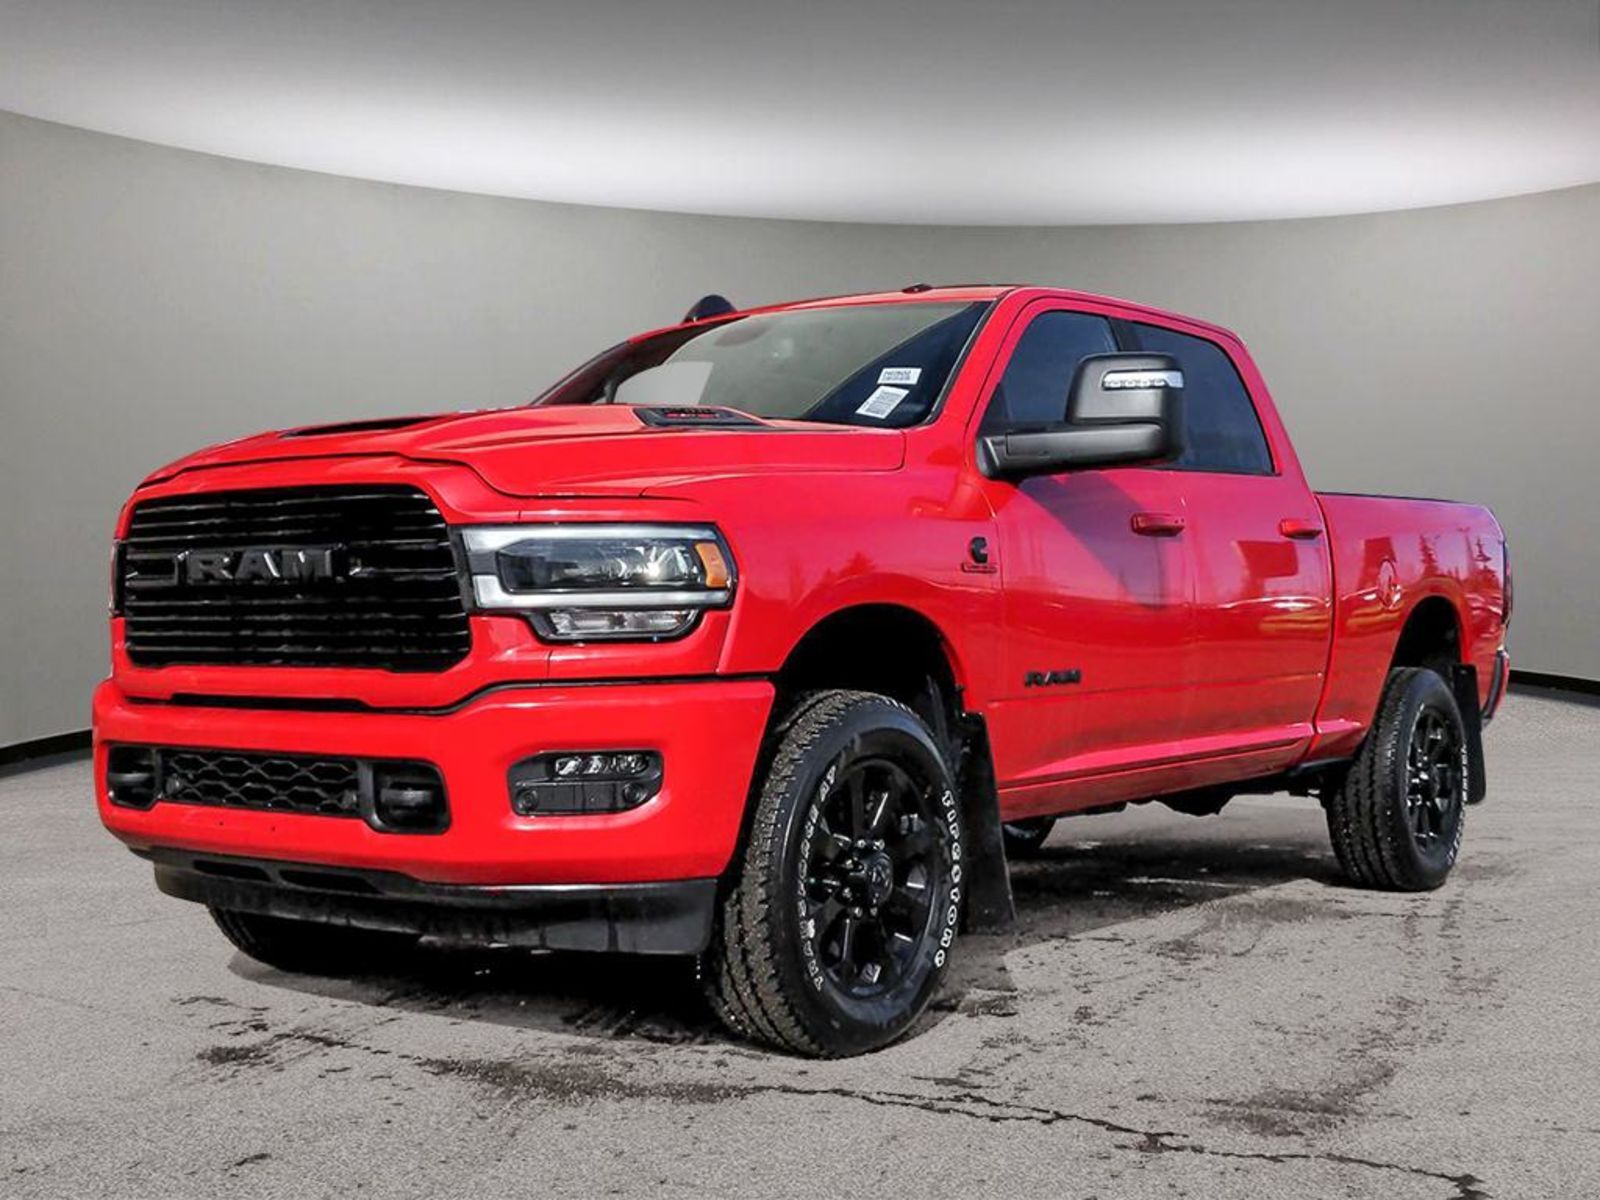 2024 Ram 2500 LARAMIE NIGHT EDITION IN FLAME RED EQUIPPED WITH A